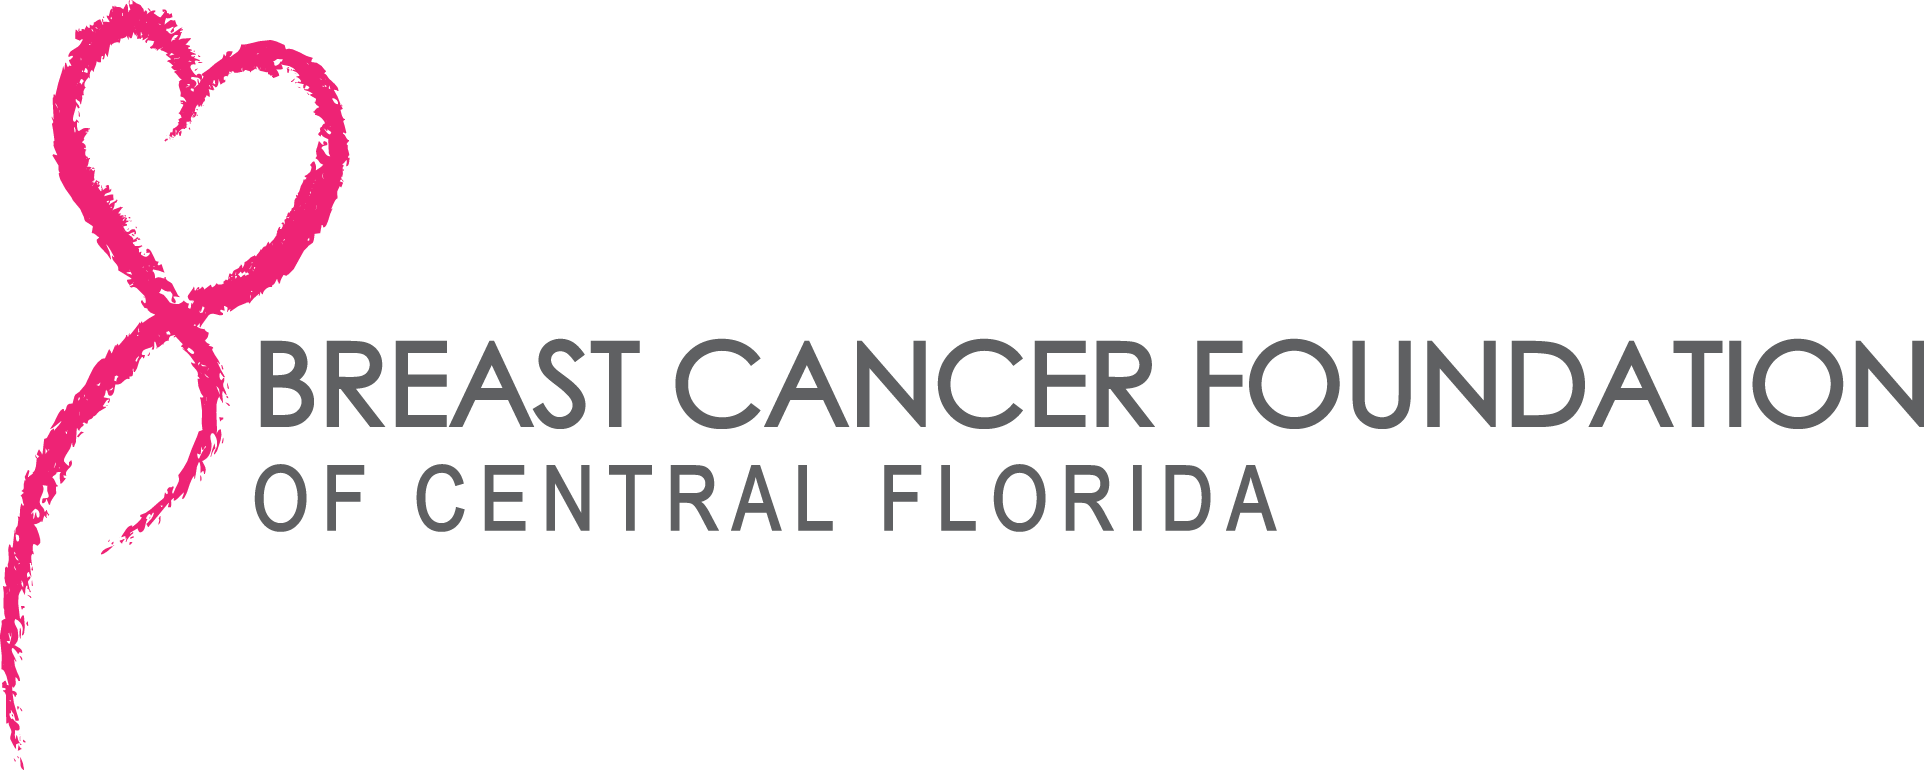 Breast Cancer Foundation of Central Florida